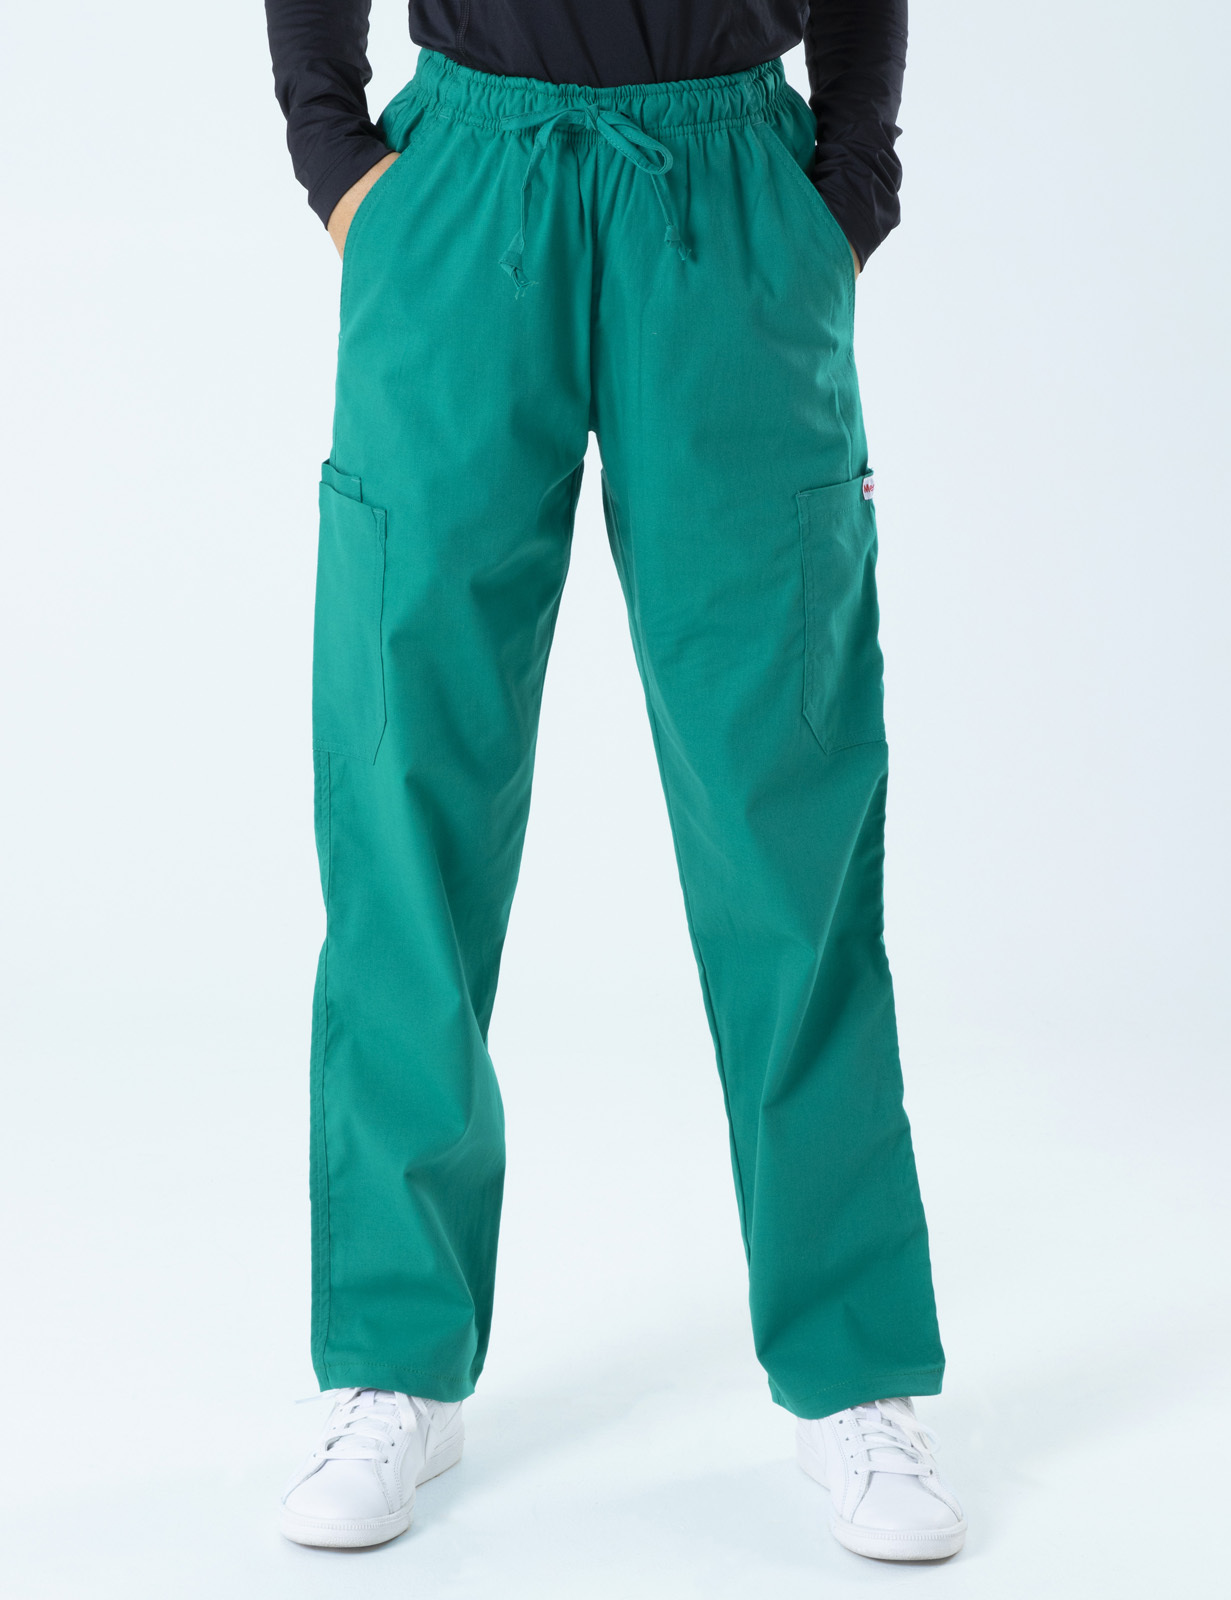 Pathology North (Women's Fit Spandex Scrub Top in Hunter and Cargo Pants in Black incl Logos)